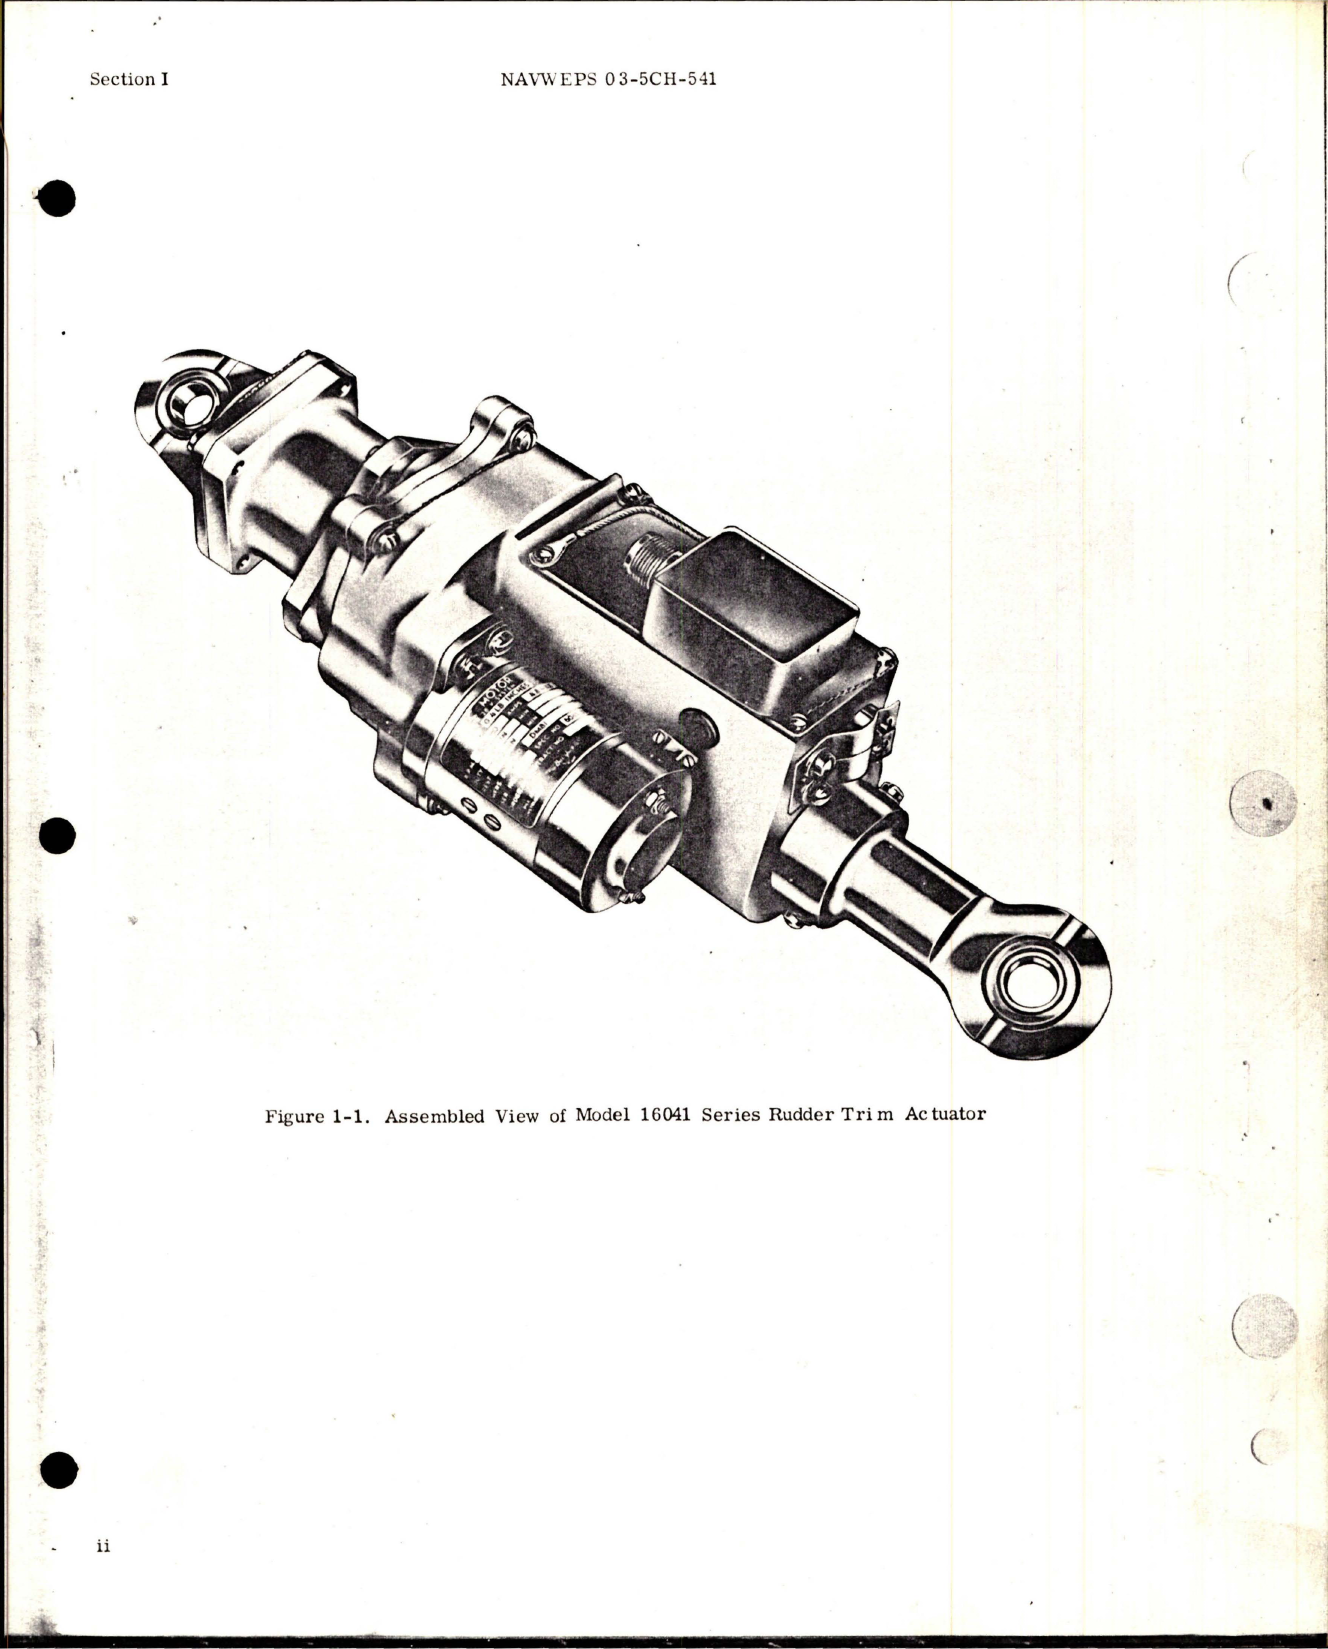 Sample page 7 from AirCorps Library document: Overhaul Instructions for Rudder Trim Actuator